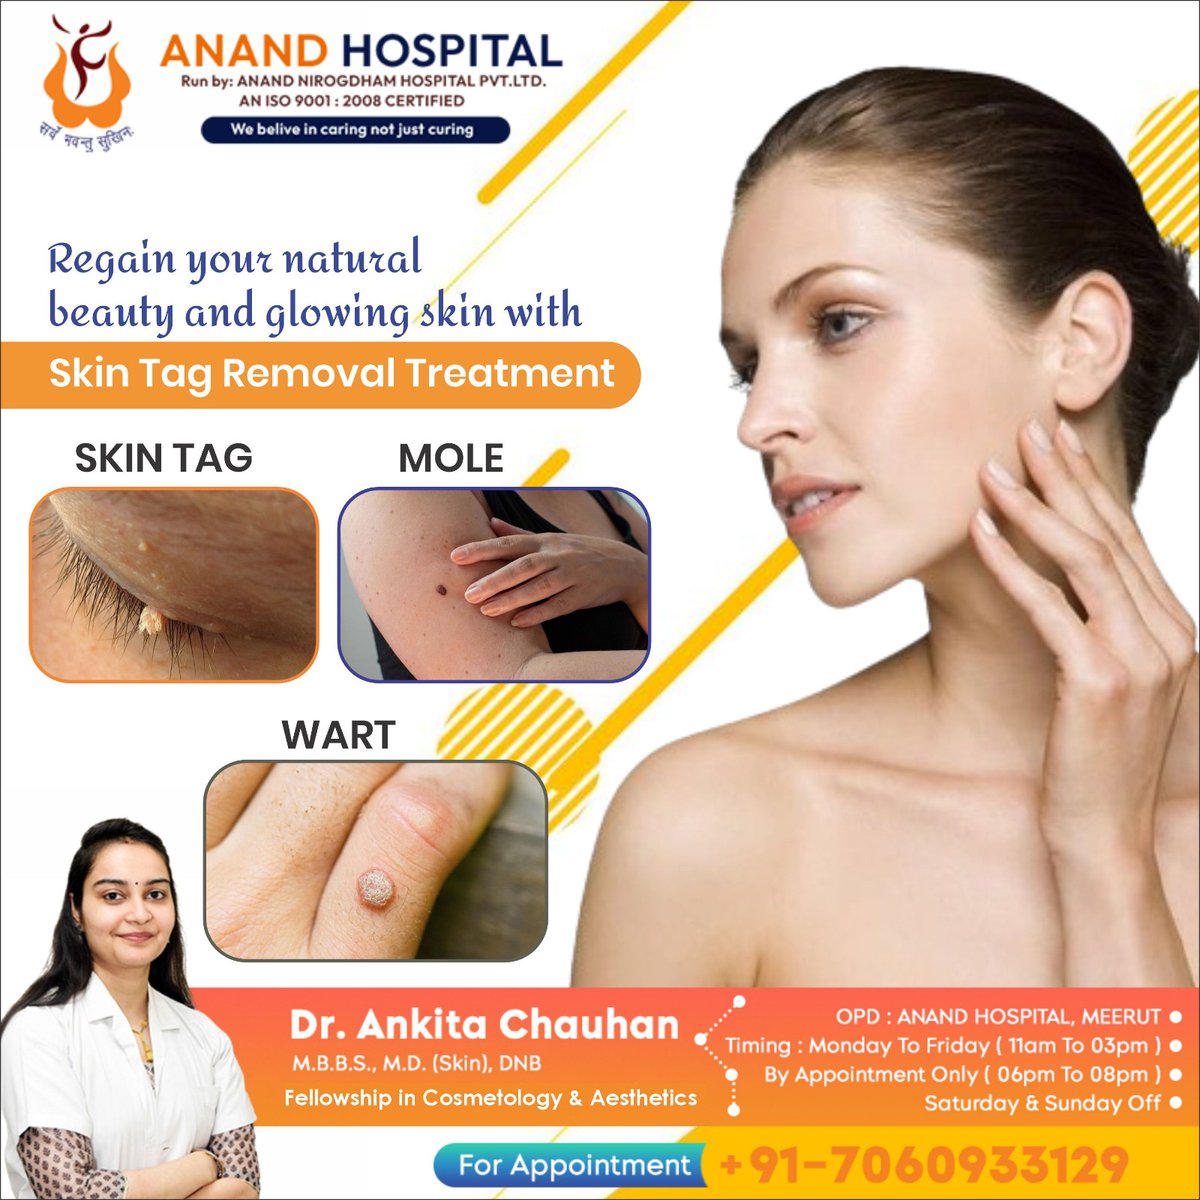 Regain your natural beauty and glowing skin with Skin Tag Removal Treatment
.
linktr.ee/dr_ankitachauh…
.
#drankitachauhan #skinspecialist #cosmetologist #dermatologist #skintagremoval #skincare #moleremoval #wartremoval #microneedling #miliaremoval #anandhospital #meerut